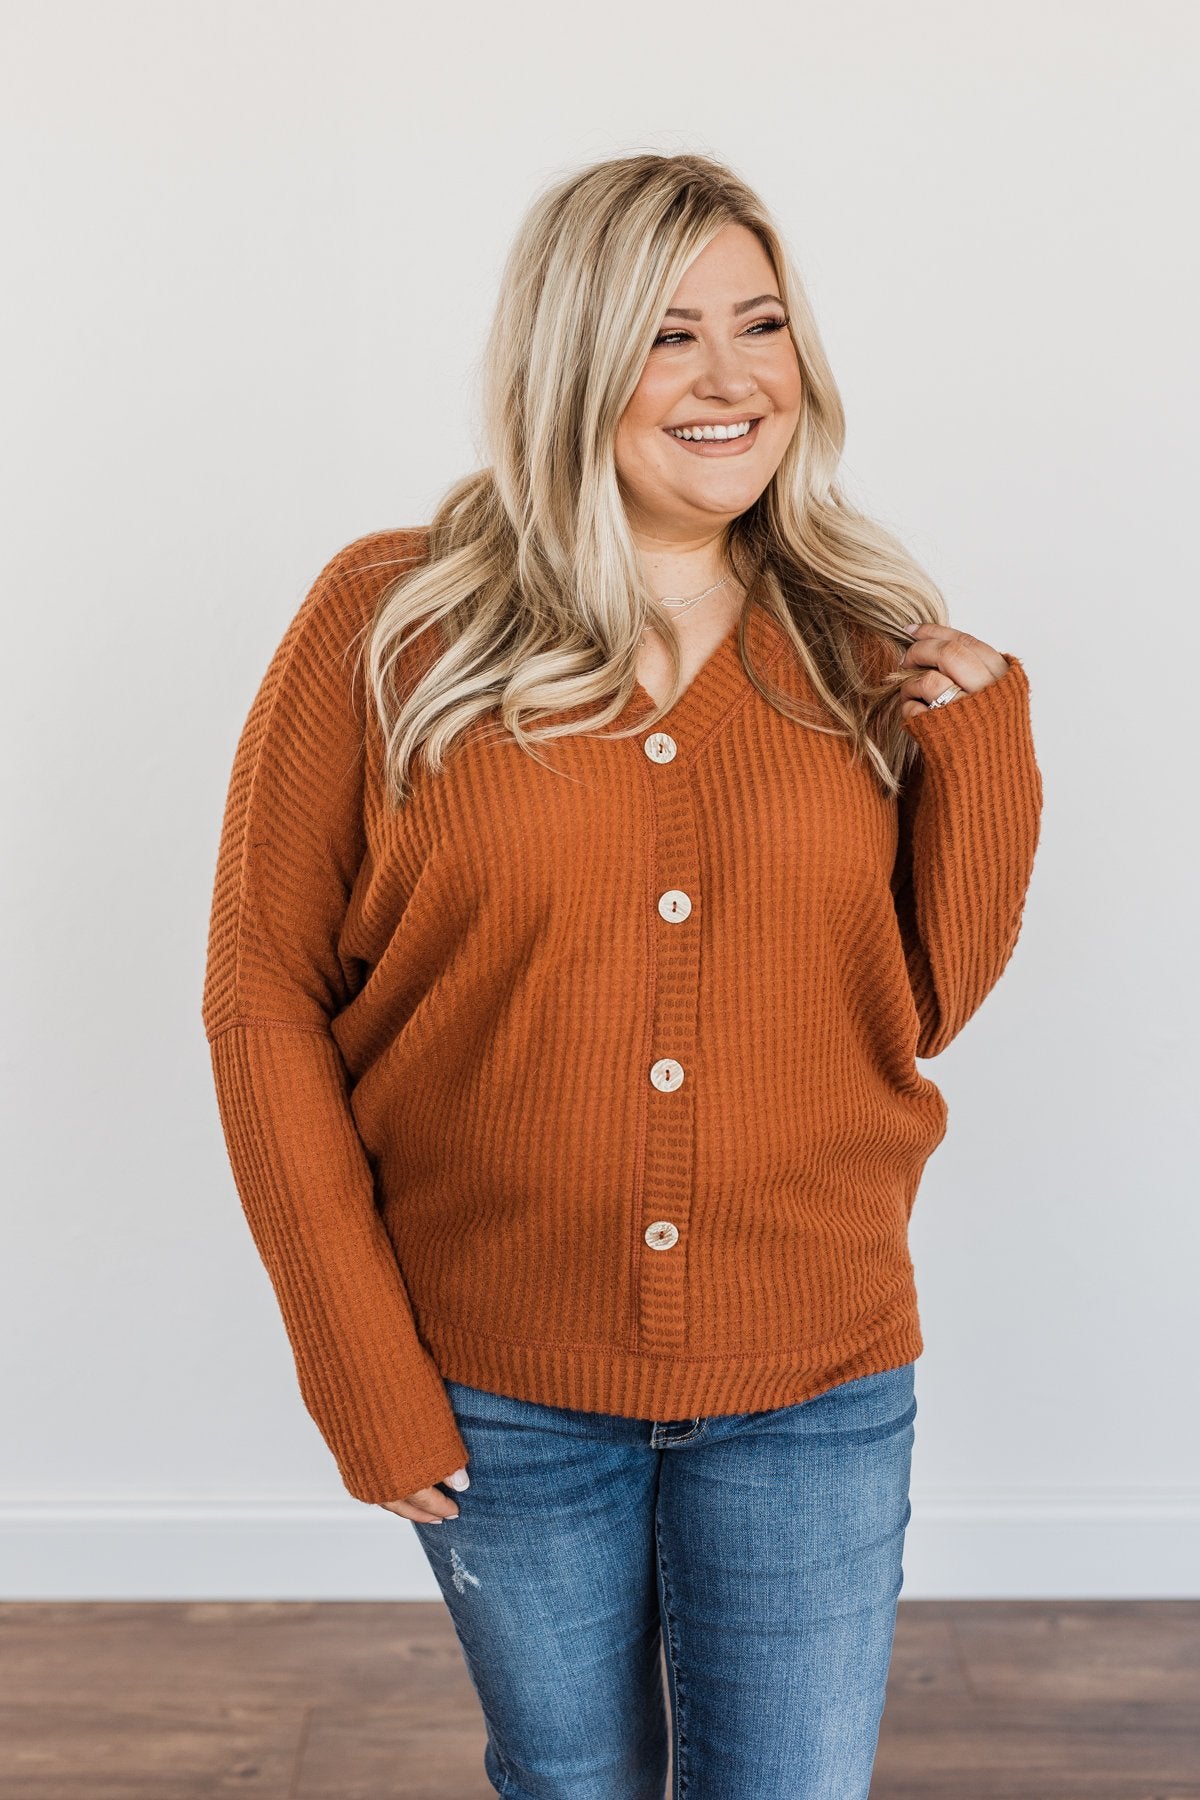 Turning A New Leaf Long Sleeve Waffle Knit Top- Rust